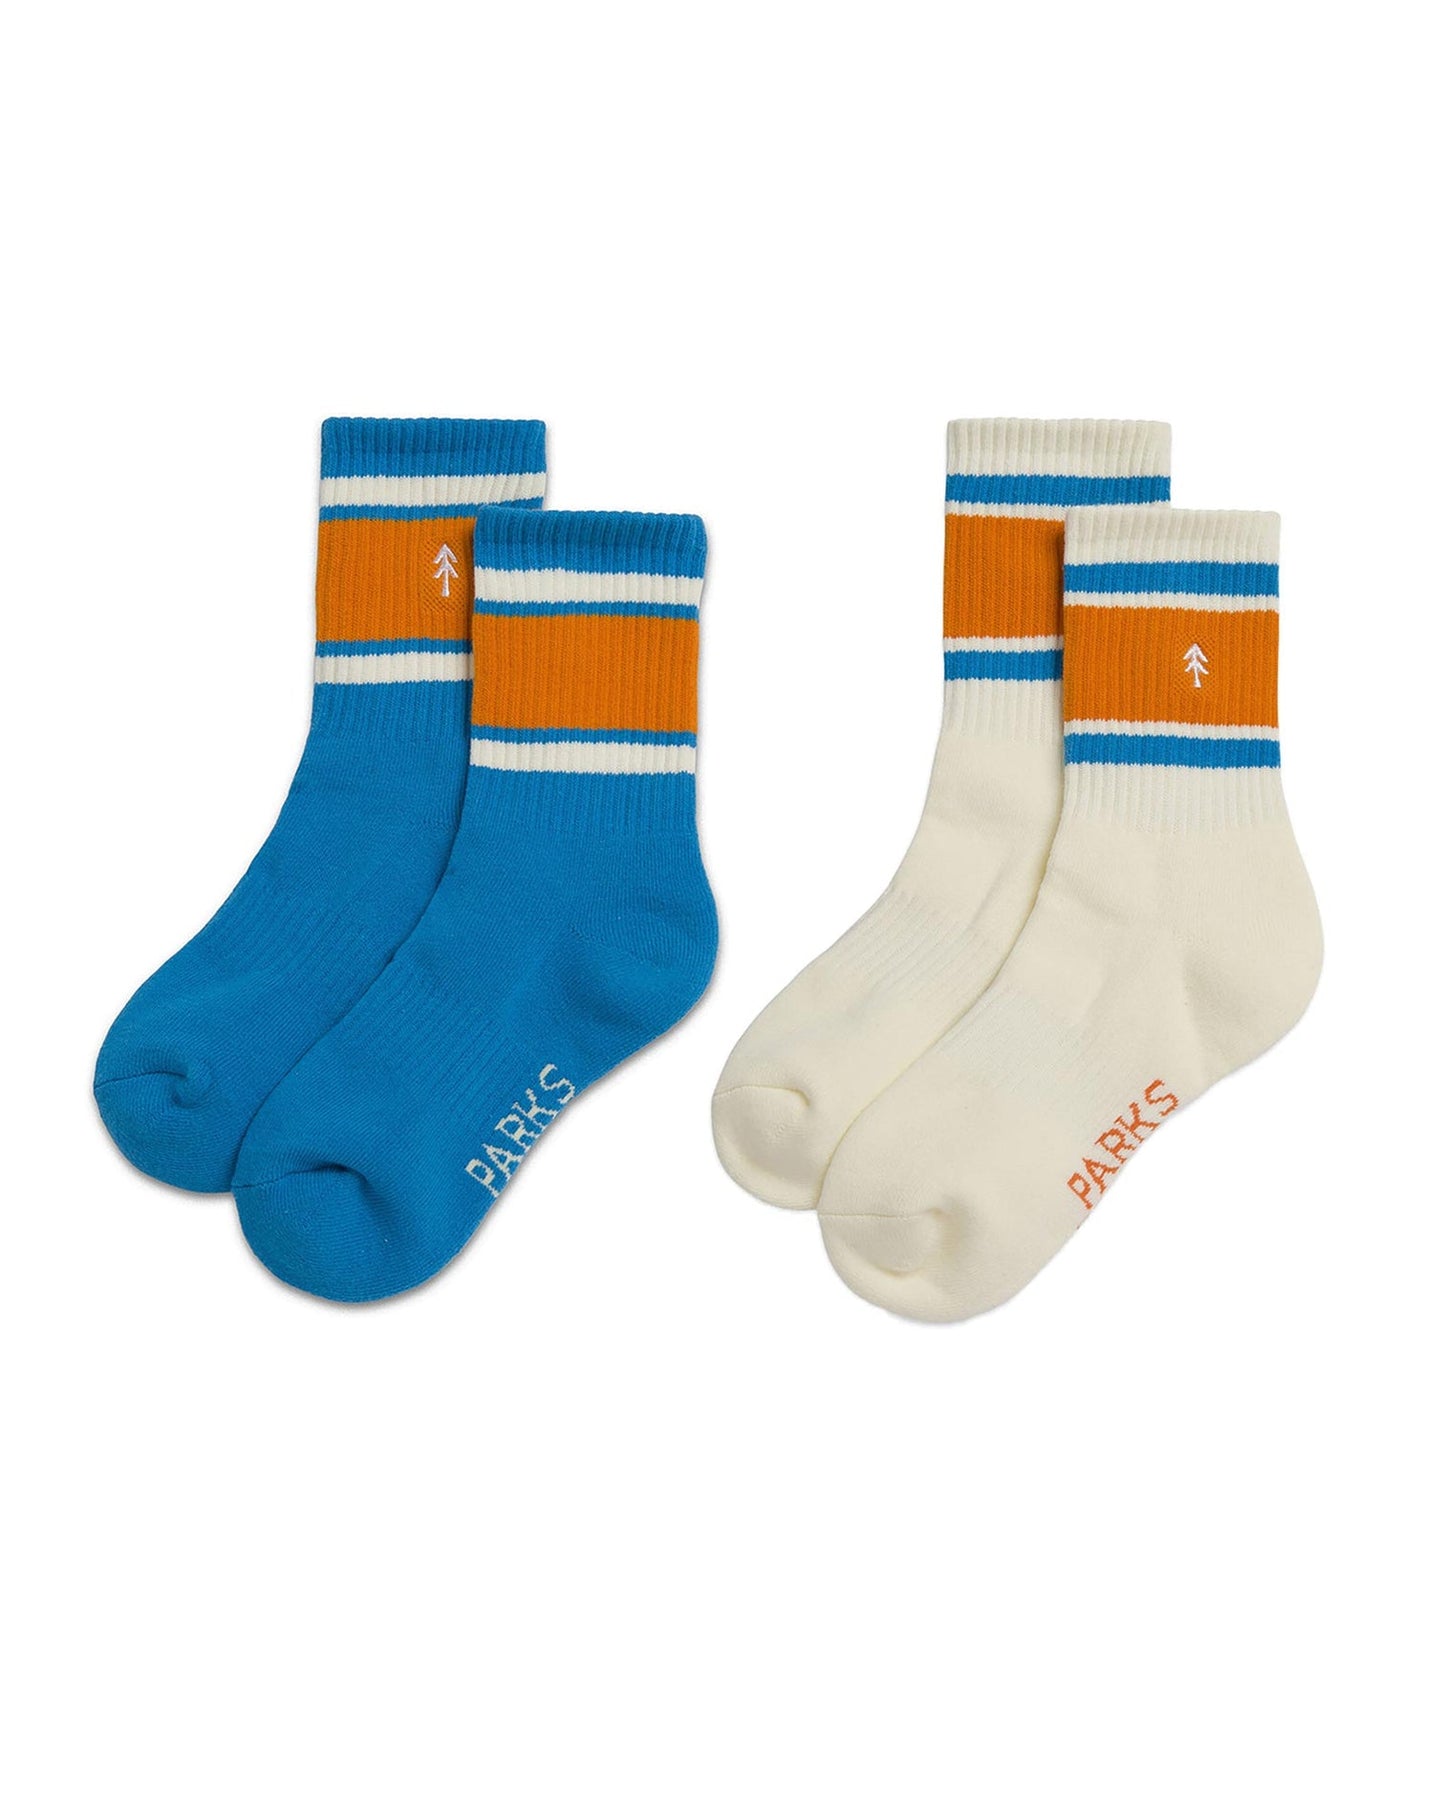 Dusty Teal & Natural Trail Crew Tube Sock 2 Pack